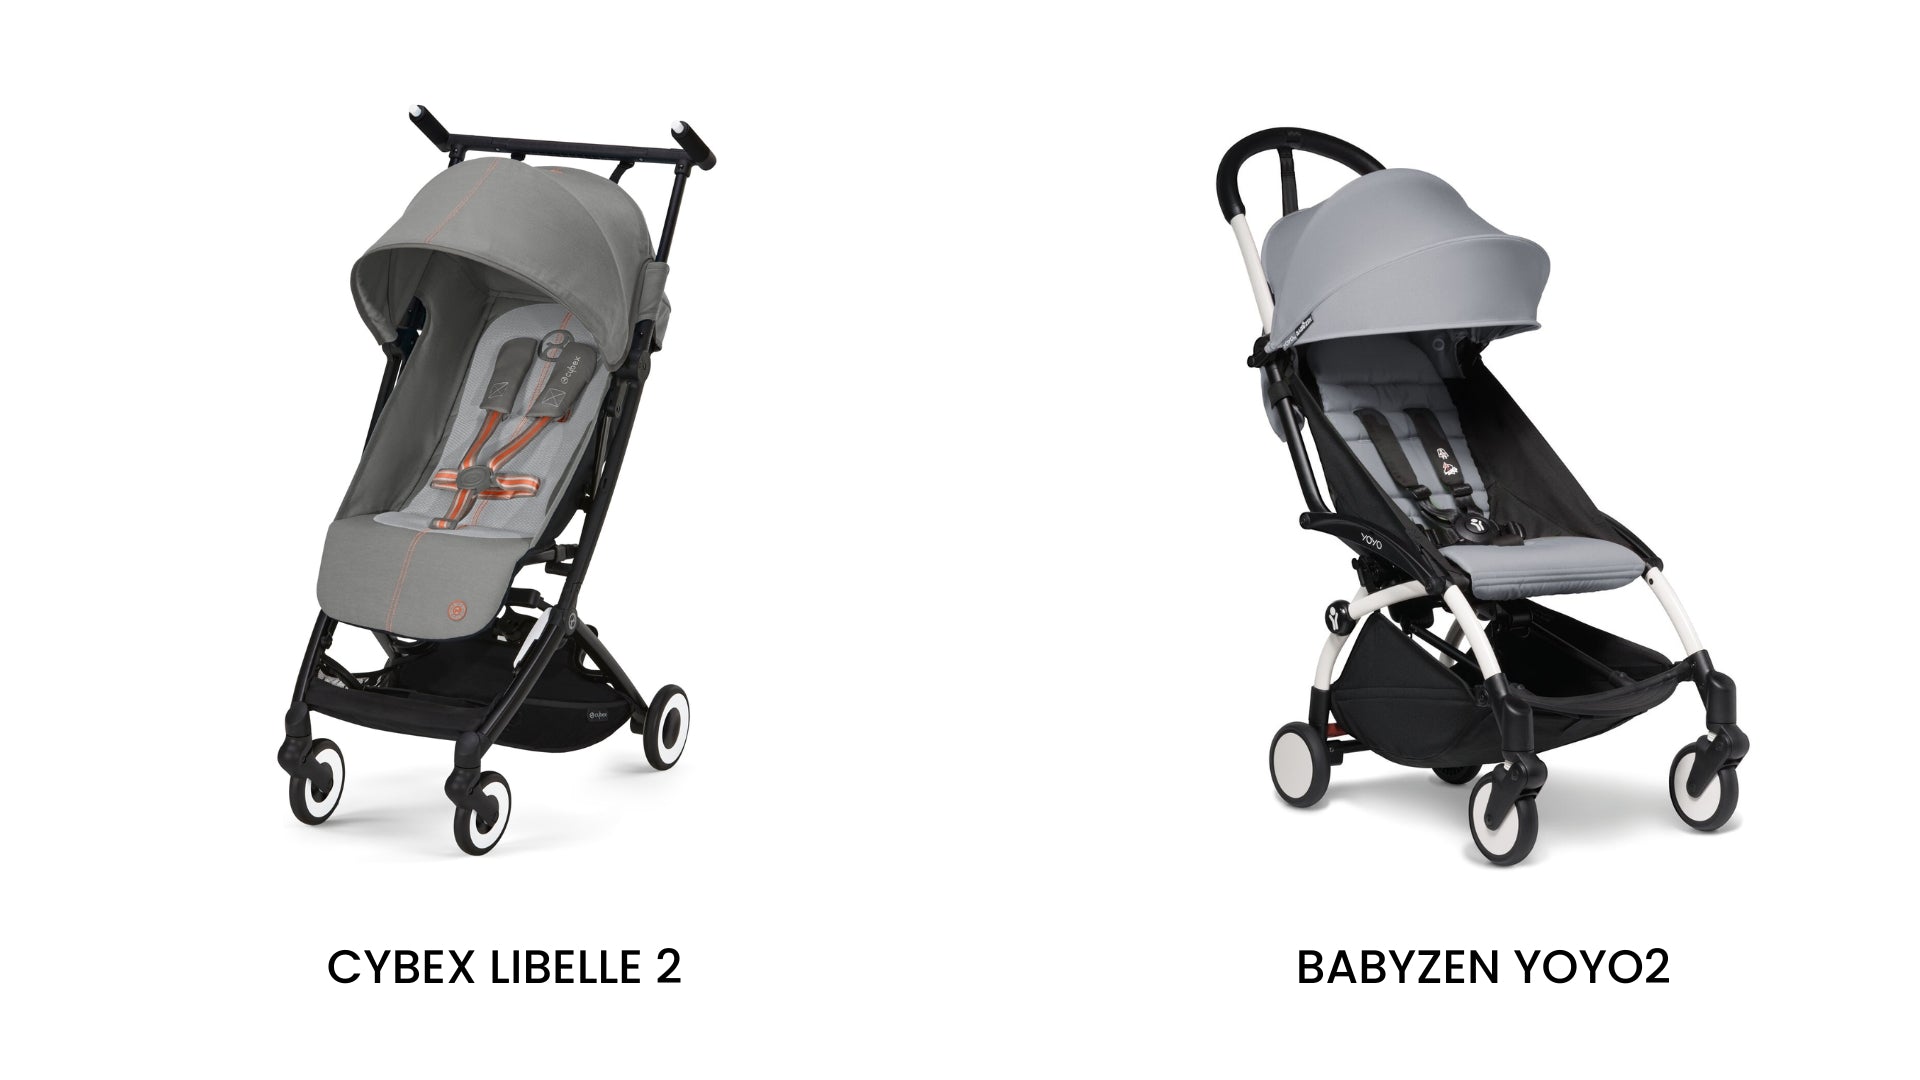 The Libelle Stroller, As the lightest ultra-compact stroller in the line,  the CYBEX Libelle is designed for everyday adventures. Its lean frame folds  into a space-saving